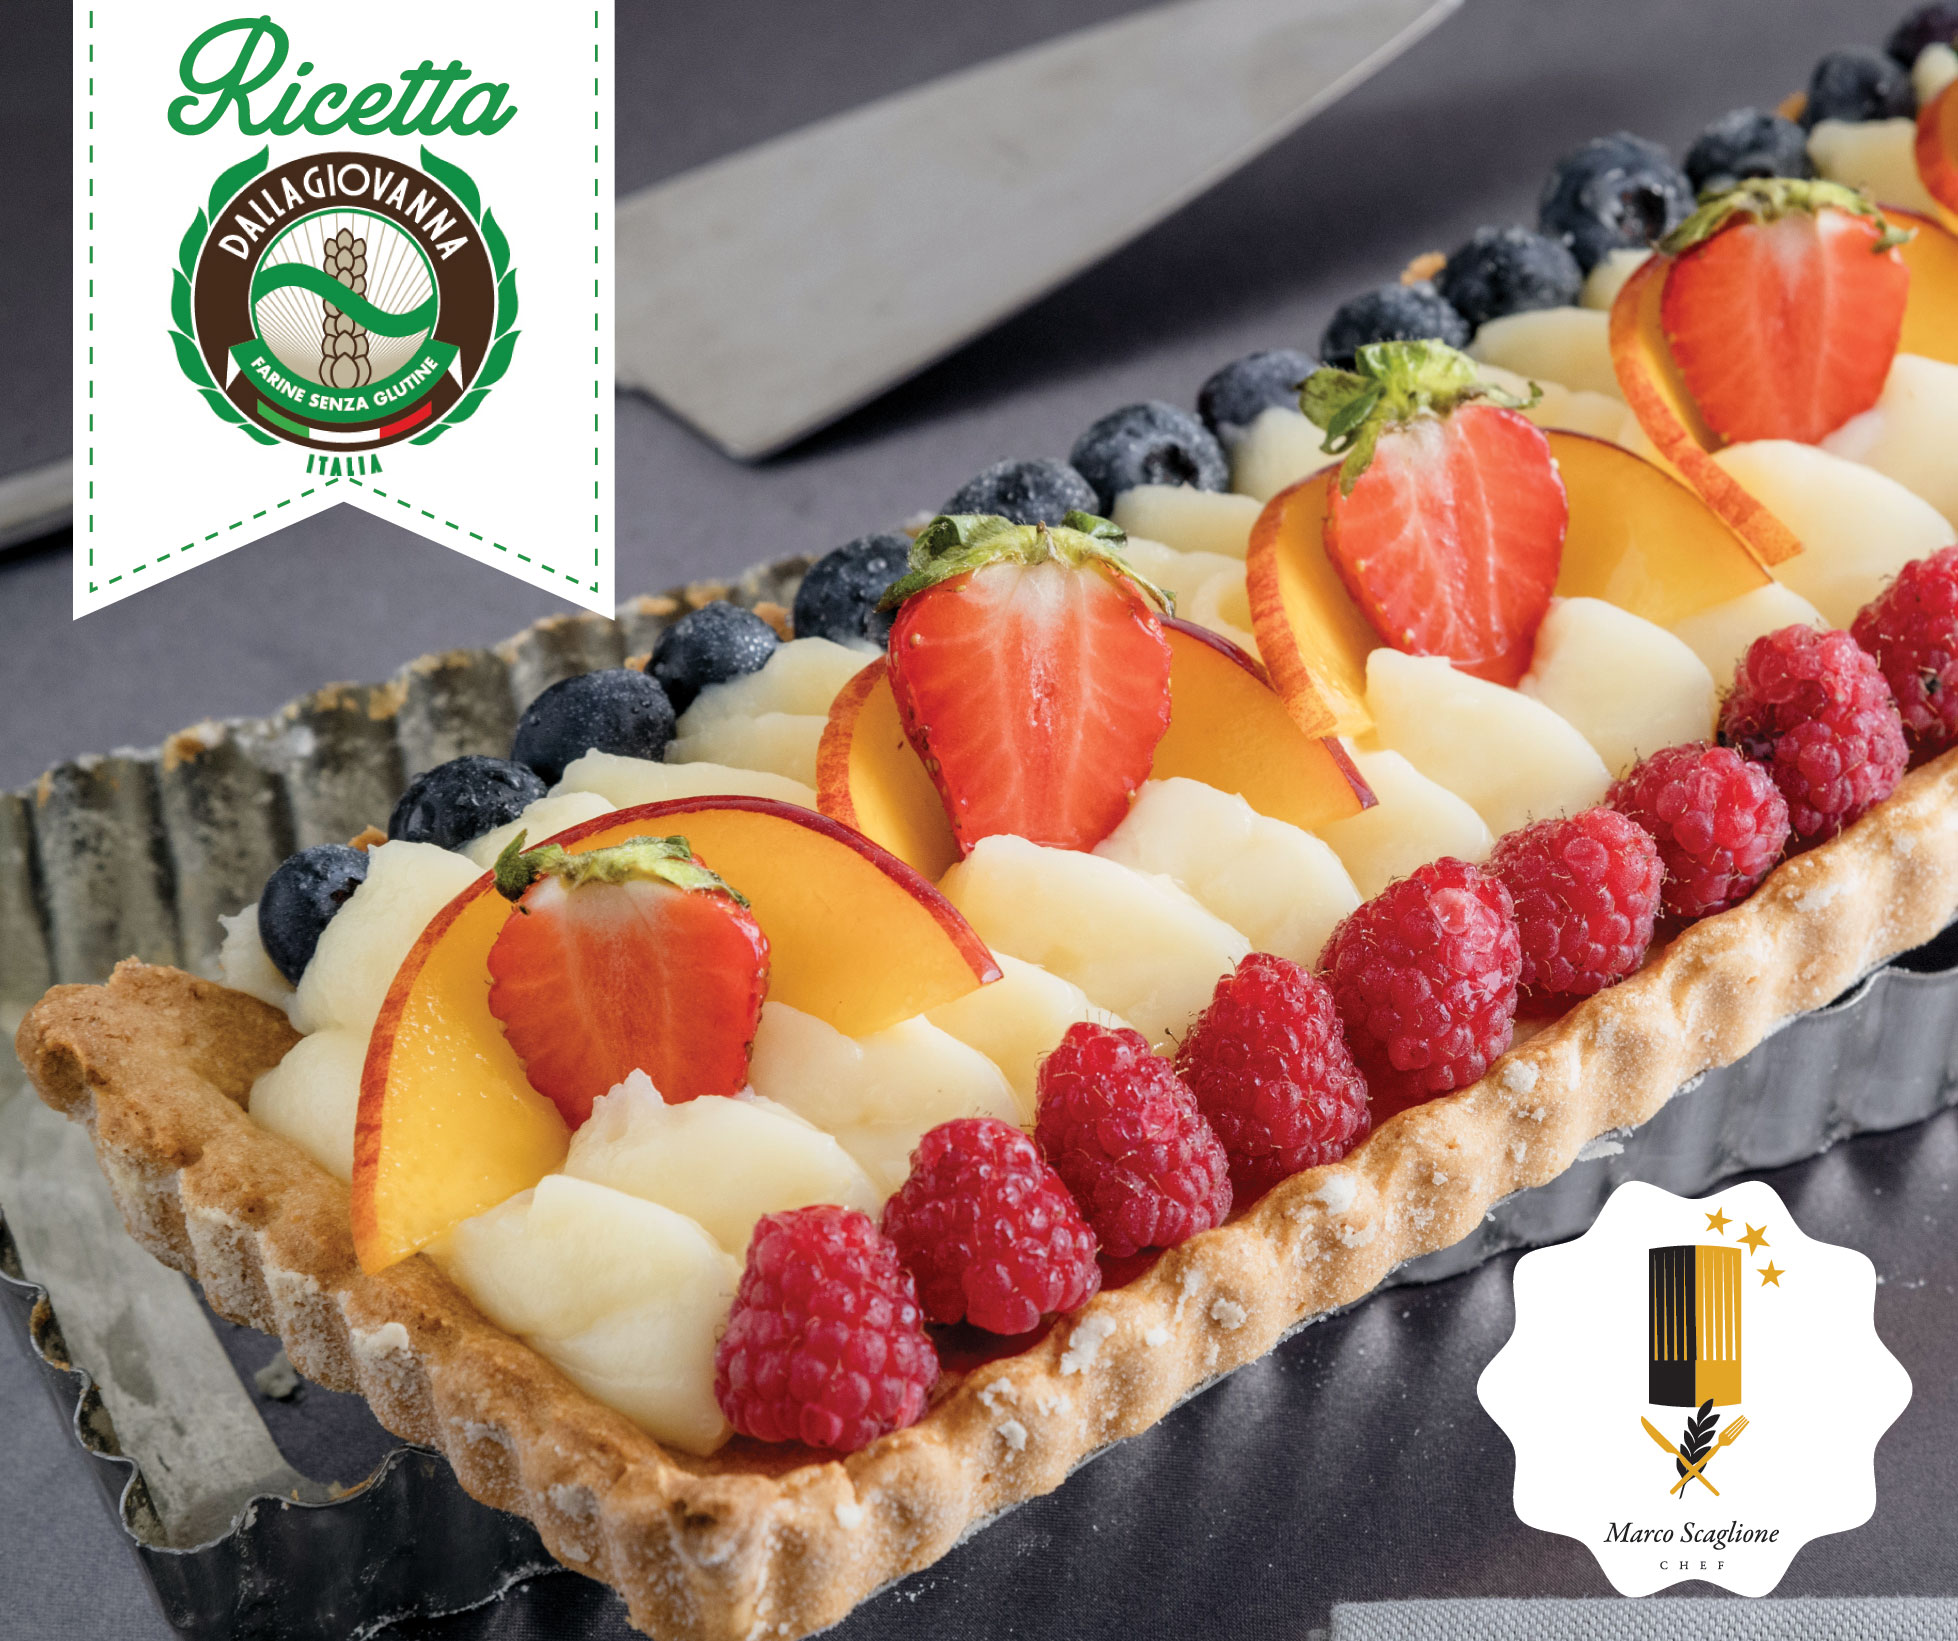 Gluten-free oatmeal tart with grappa cream and fresh fruit